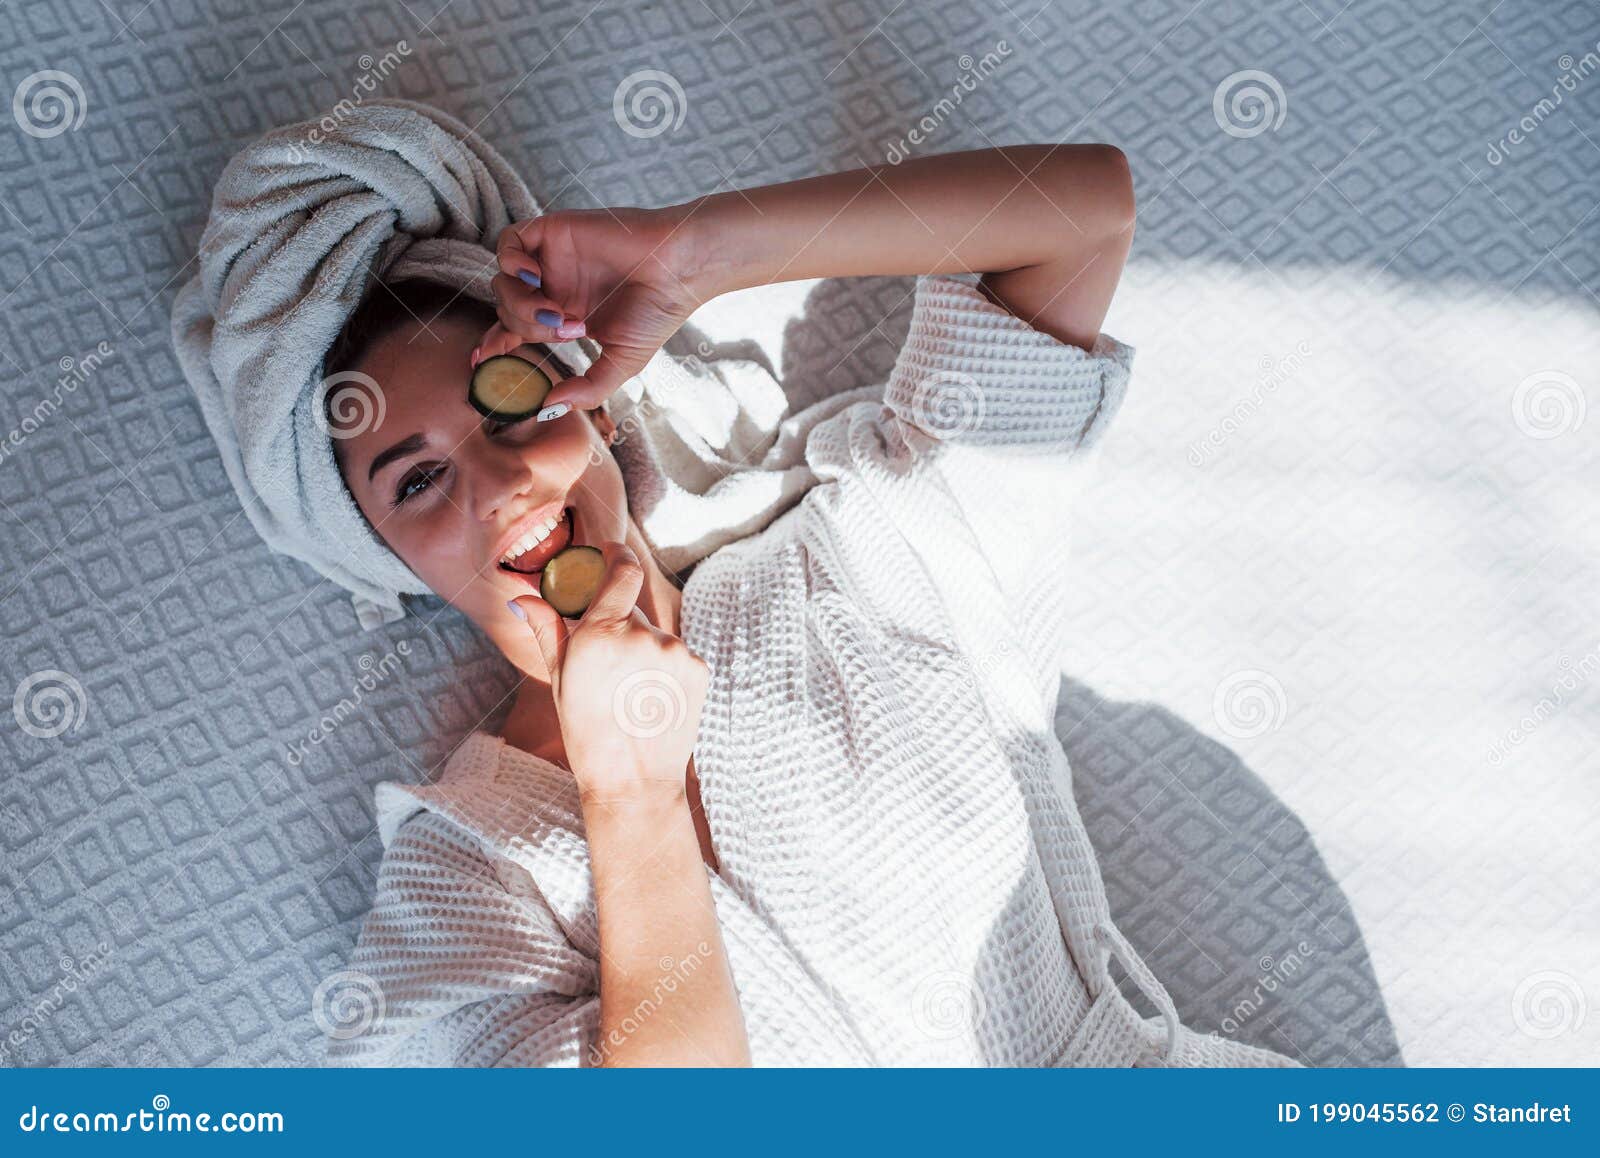 Young Positive Woman with Towel on Head Lying on the Bed with Cucumber ...